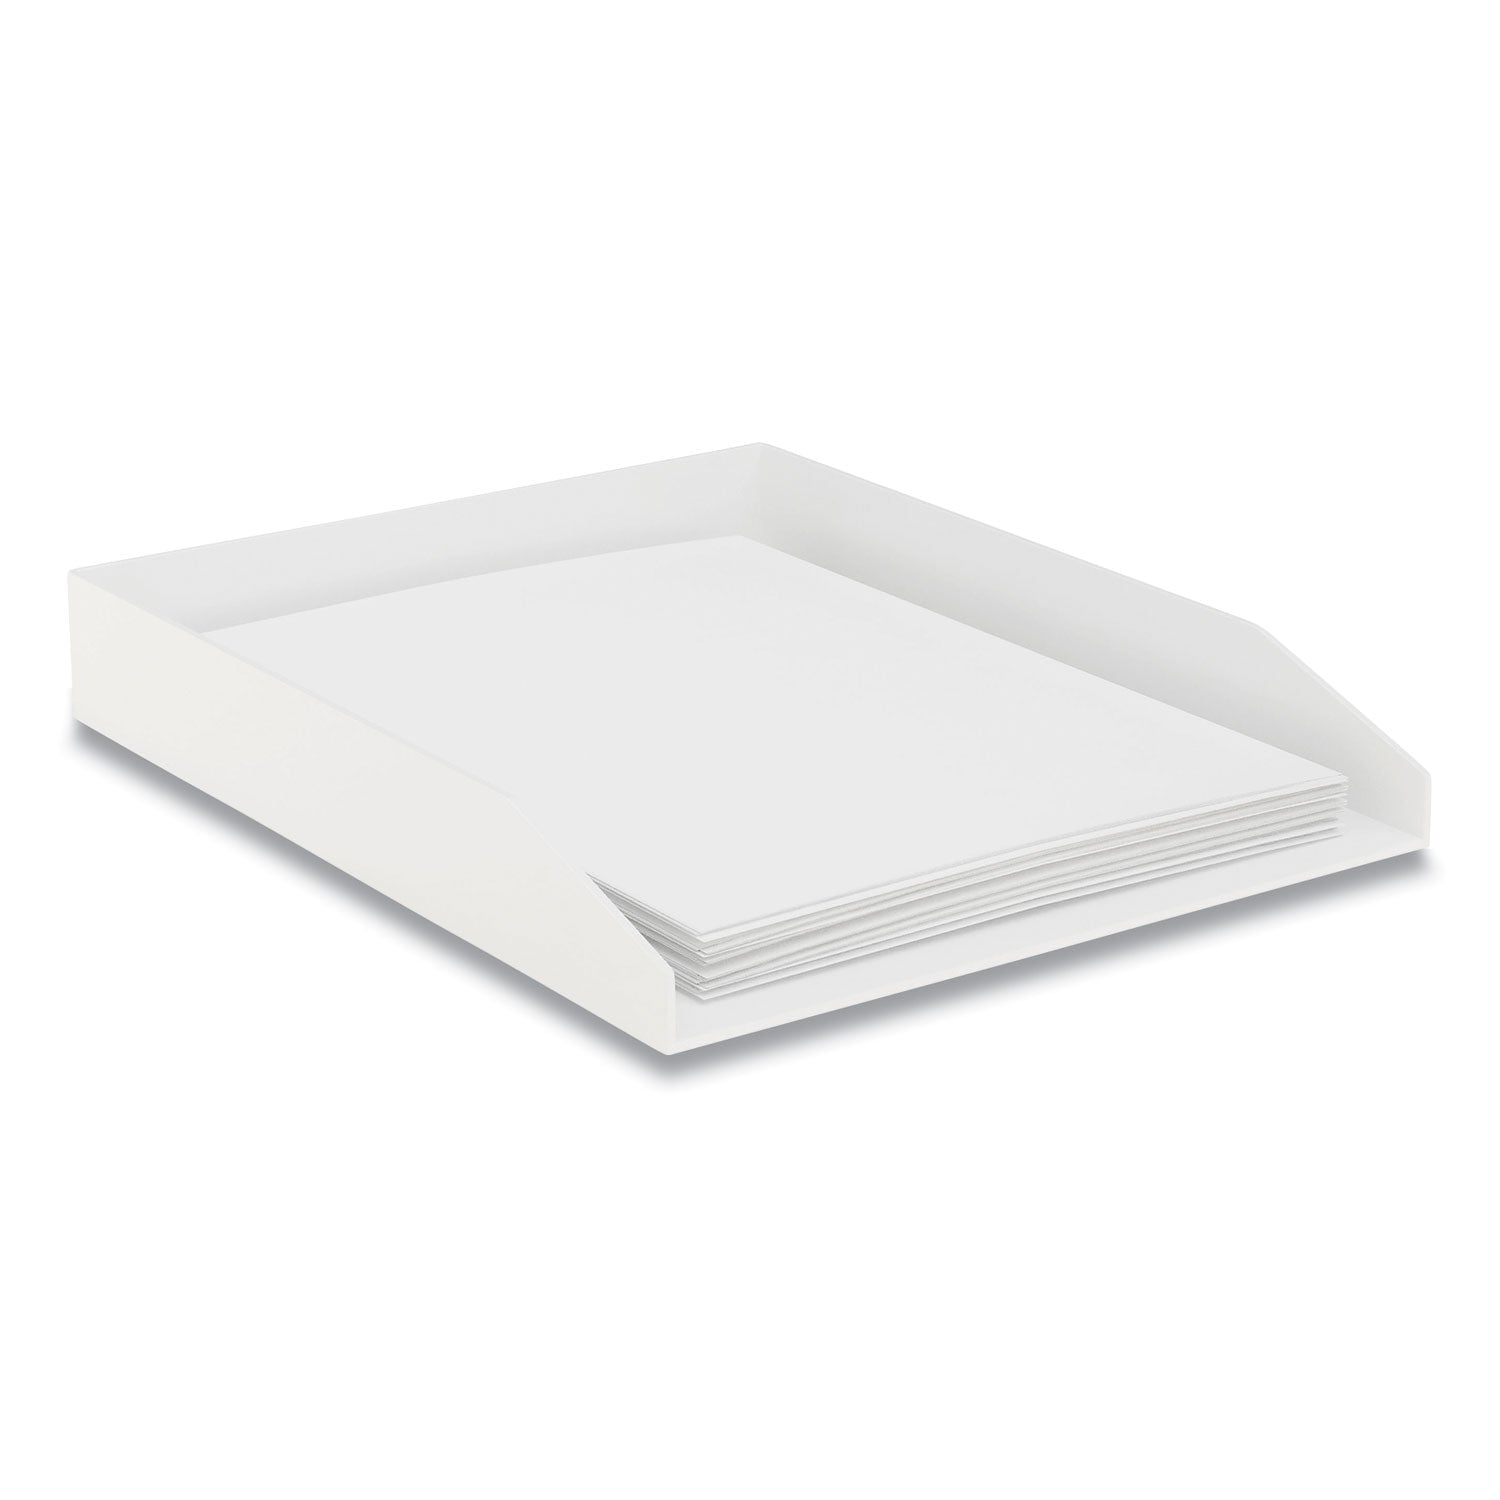 front-load-stackable-plastic-document-tray-1-section-letter-size-files-98-x-1224-x-175-white_tud24380417 - 2